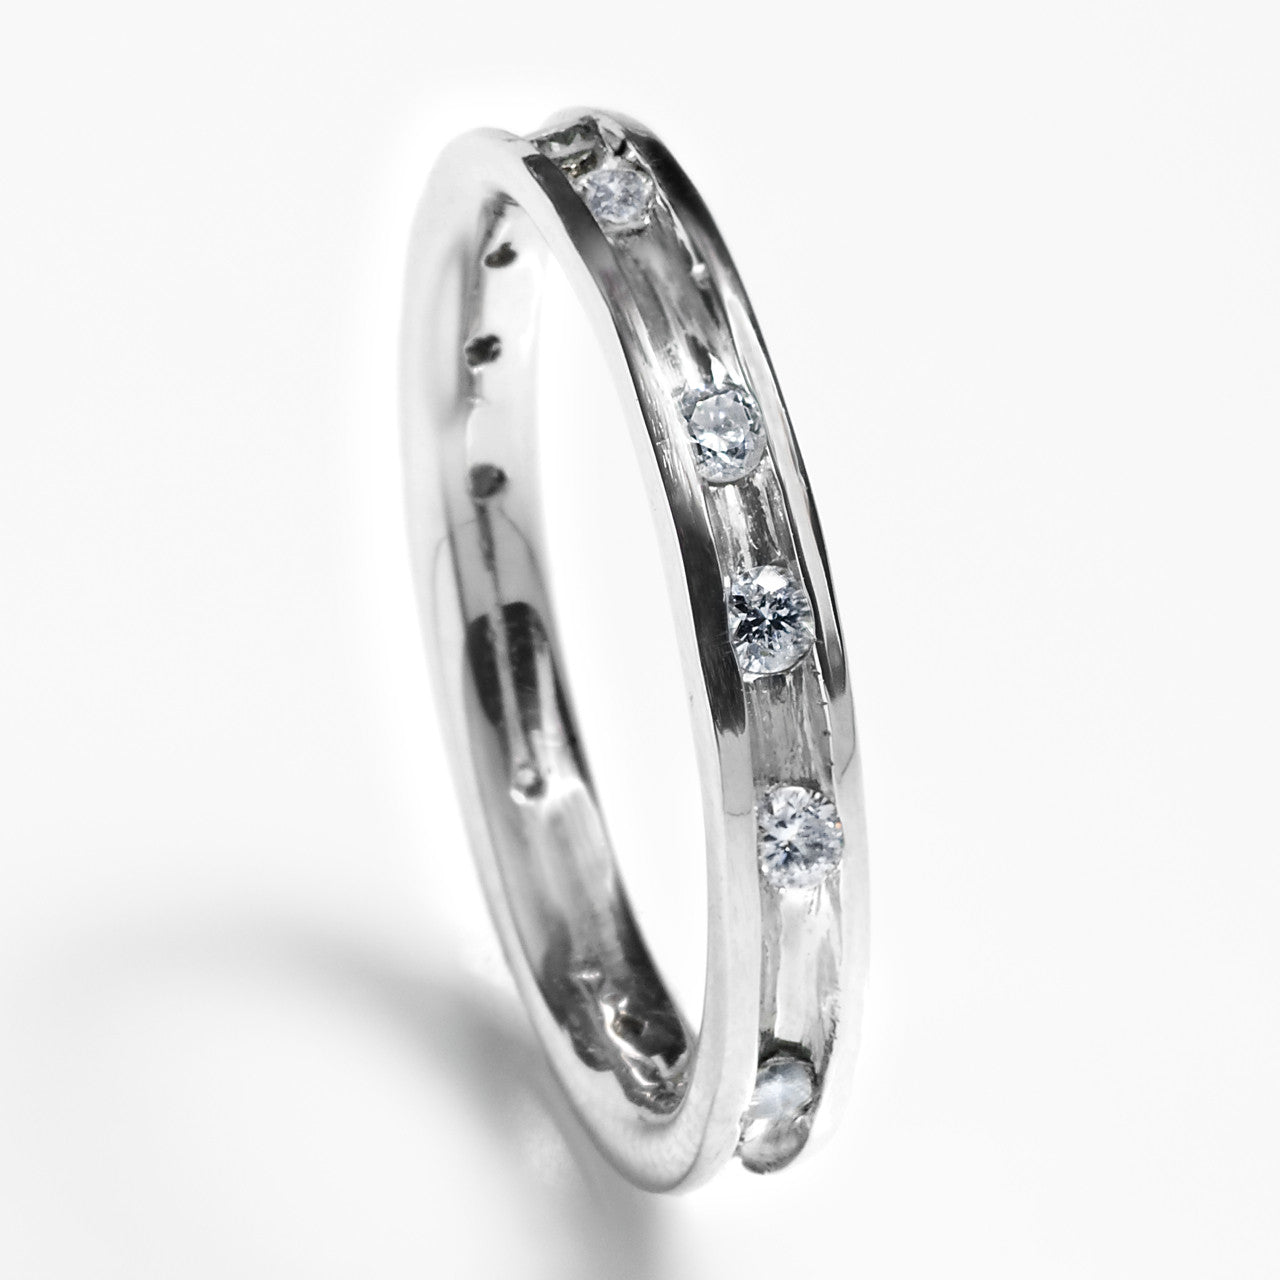 Channel Eternity Band